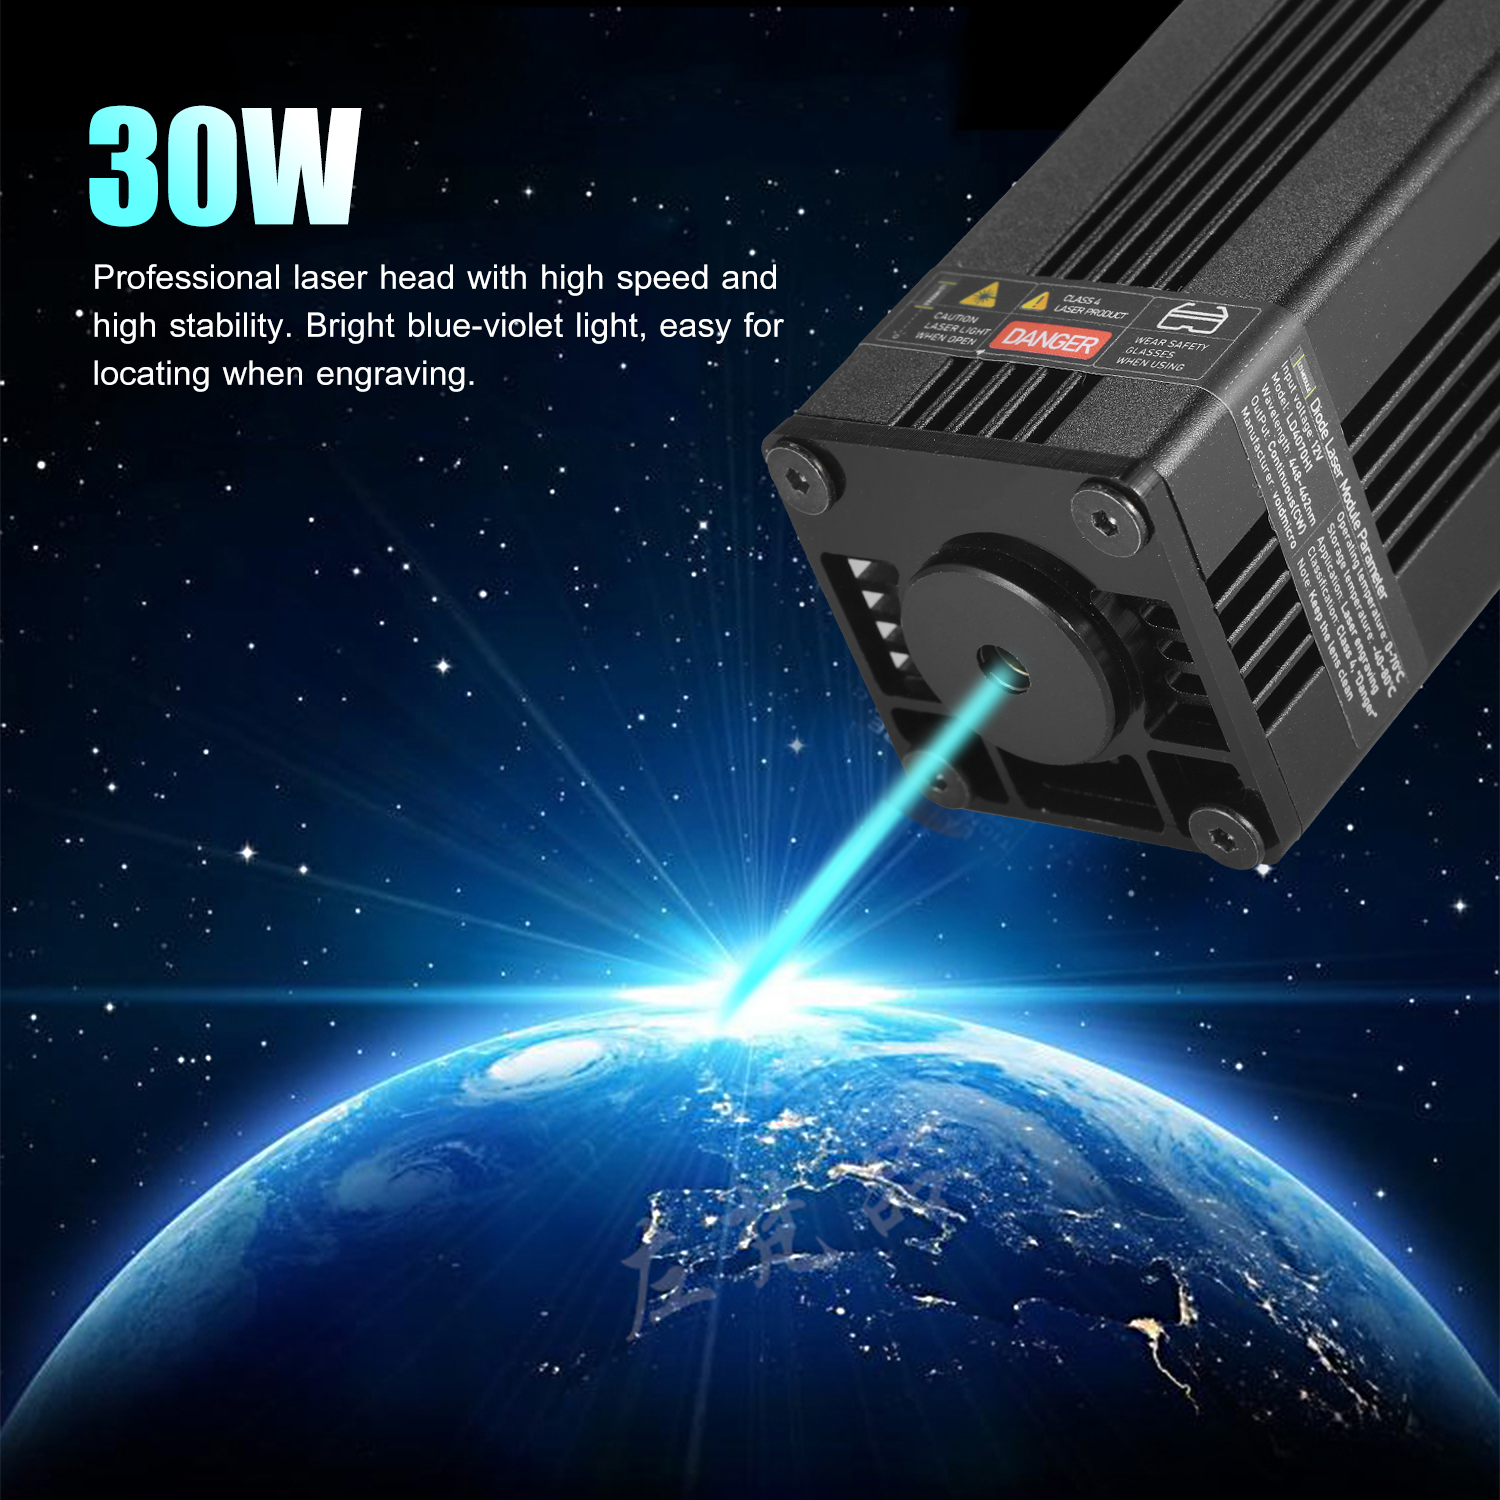 5500mW-30W 450nm Blue laser Head Laser Module For DIY Carving Engraving Machine Engraver Accessory Wood Marking Cutting Tool